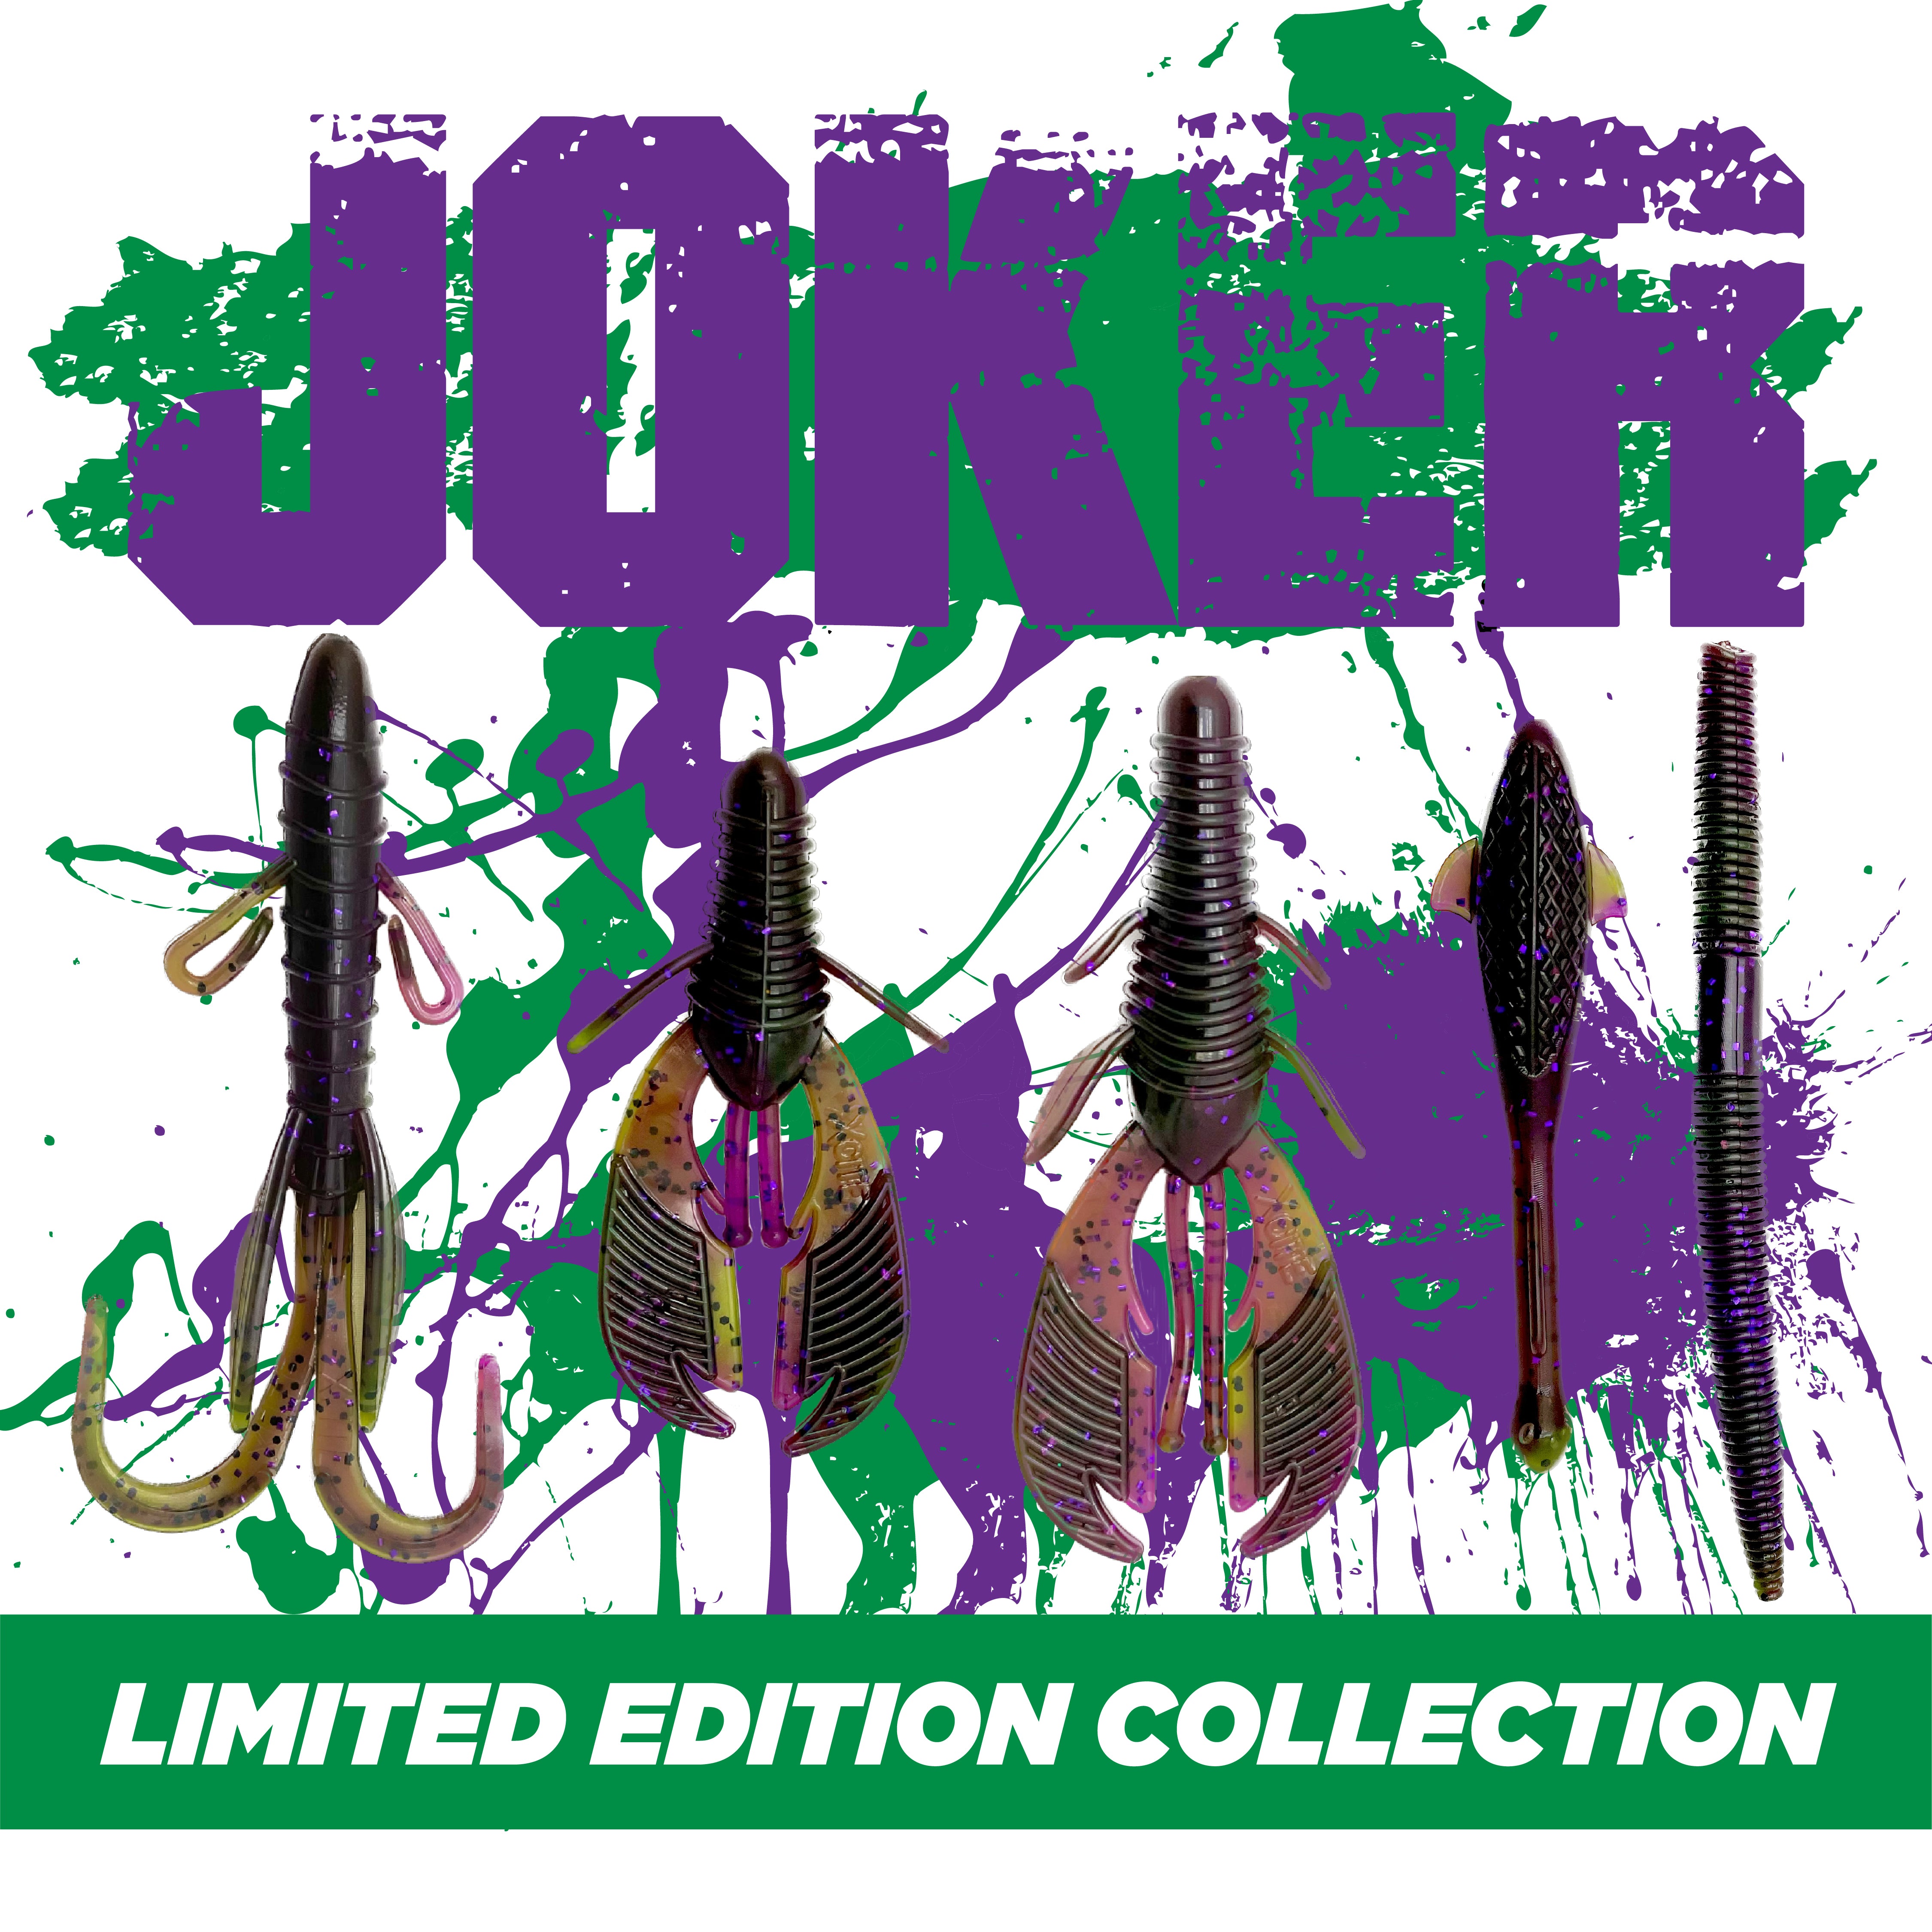 Limited Edition Joker Collection 